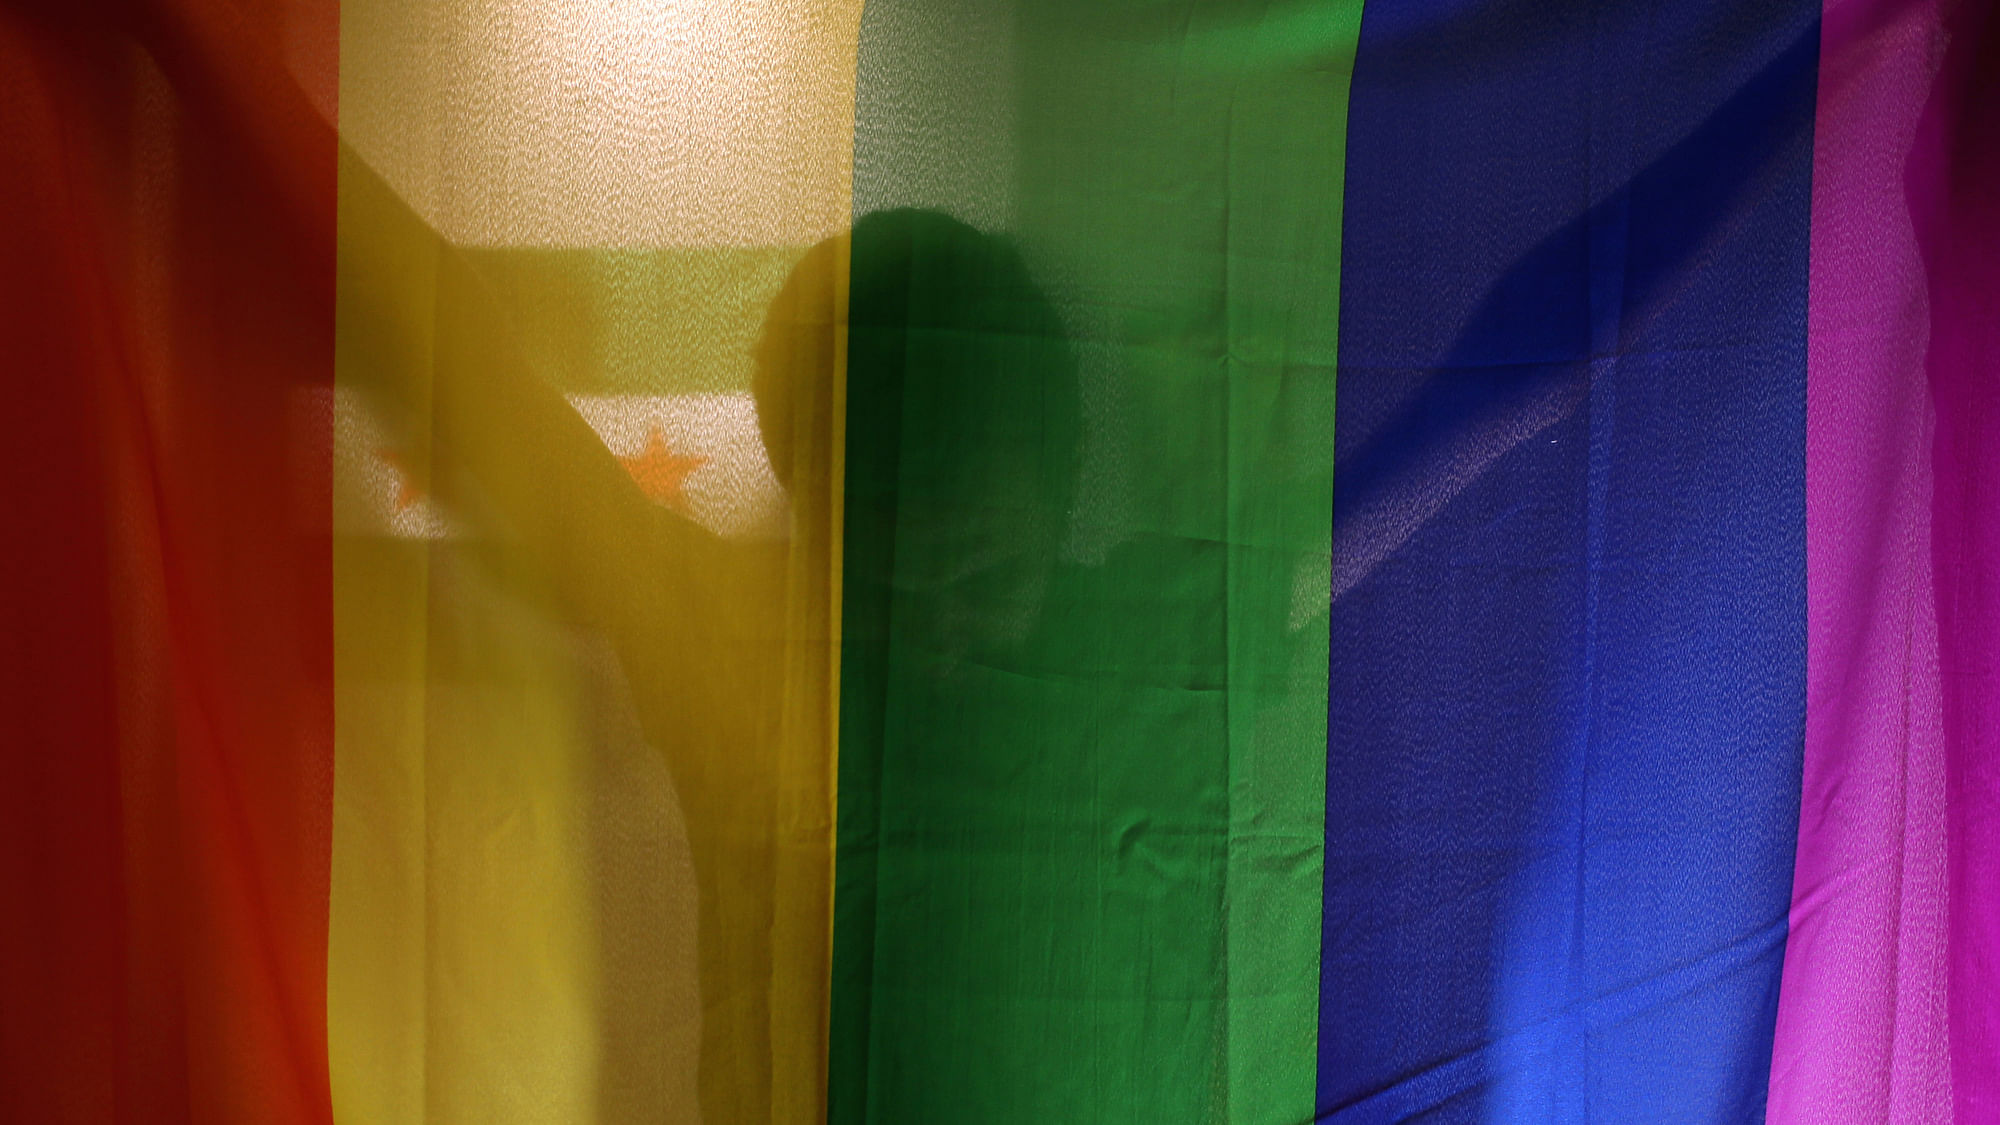 Daniel Halaby, a gay Syrian who fled from the Islamic State group, poses with the rainbow flag symbolic of LGBT+ rights in his apartment in southern Turkey.&nbsp;